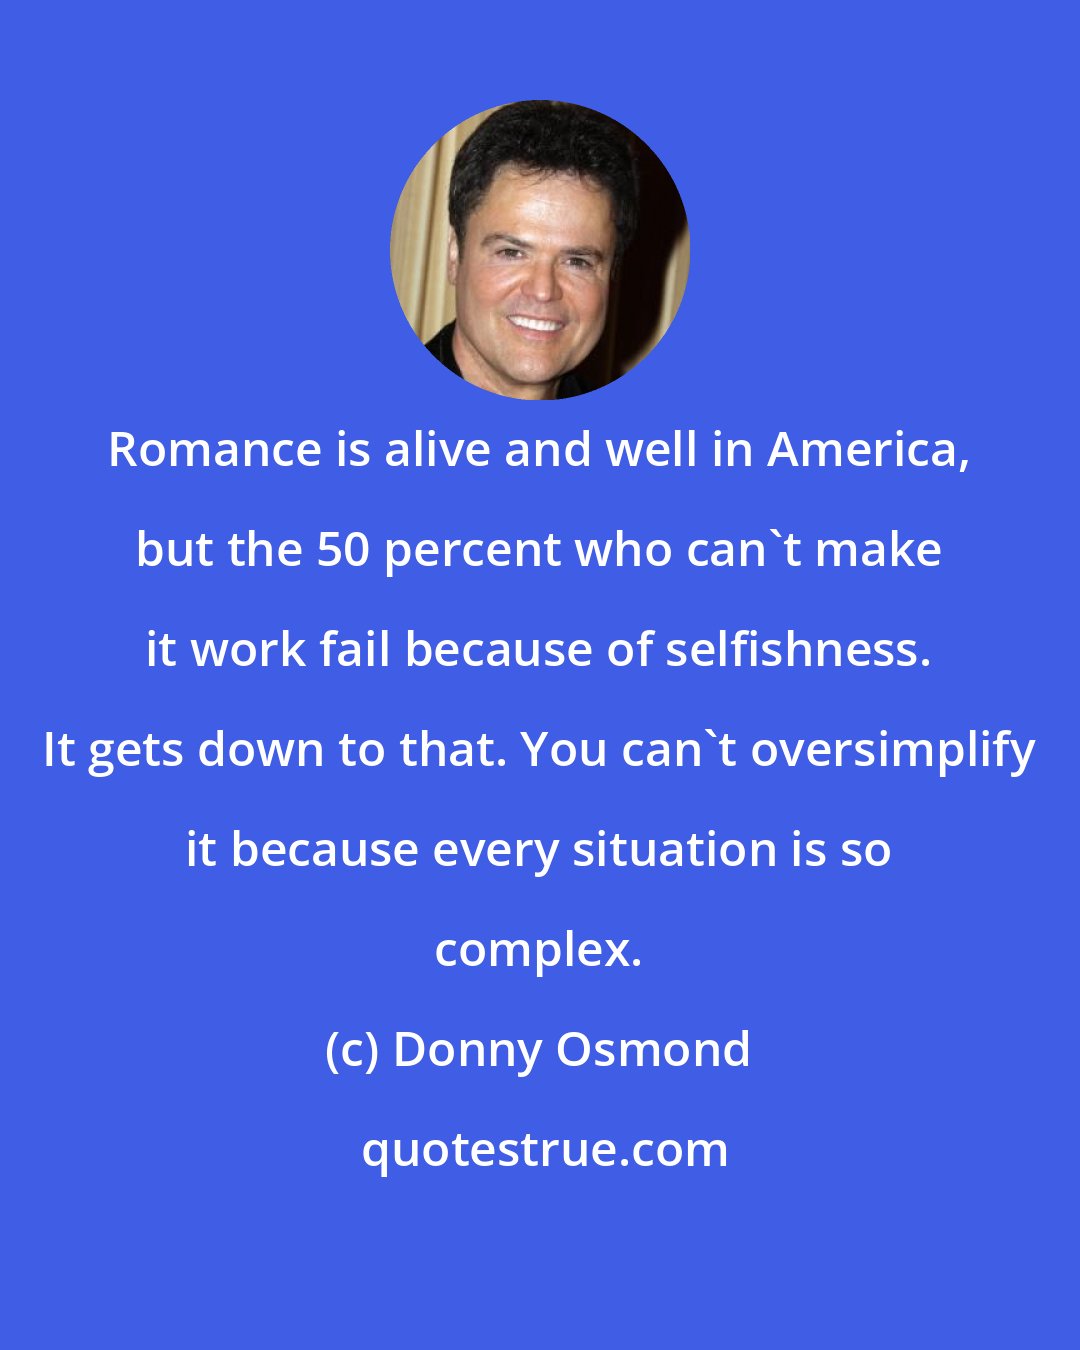 Donny Osmond: Romance is alive and well in America, but the 50 percent who can't make it work fail because of selfishness. It gets down to that. You can't oversimplify it because every situation is so complex.